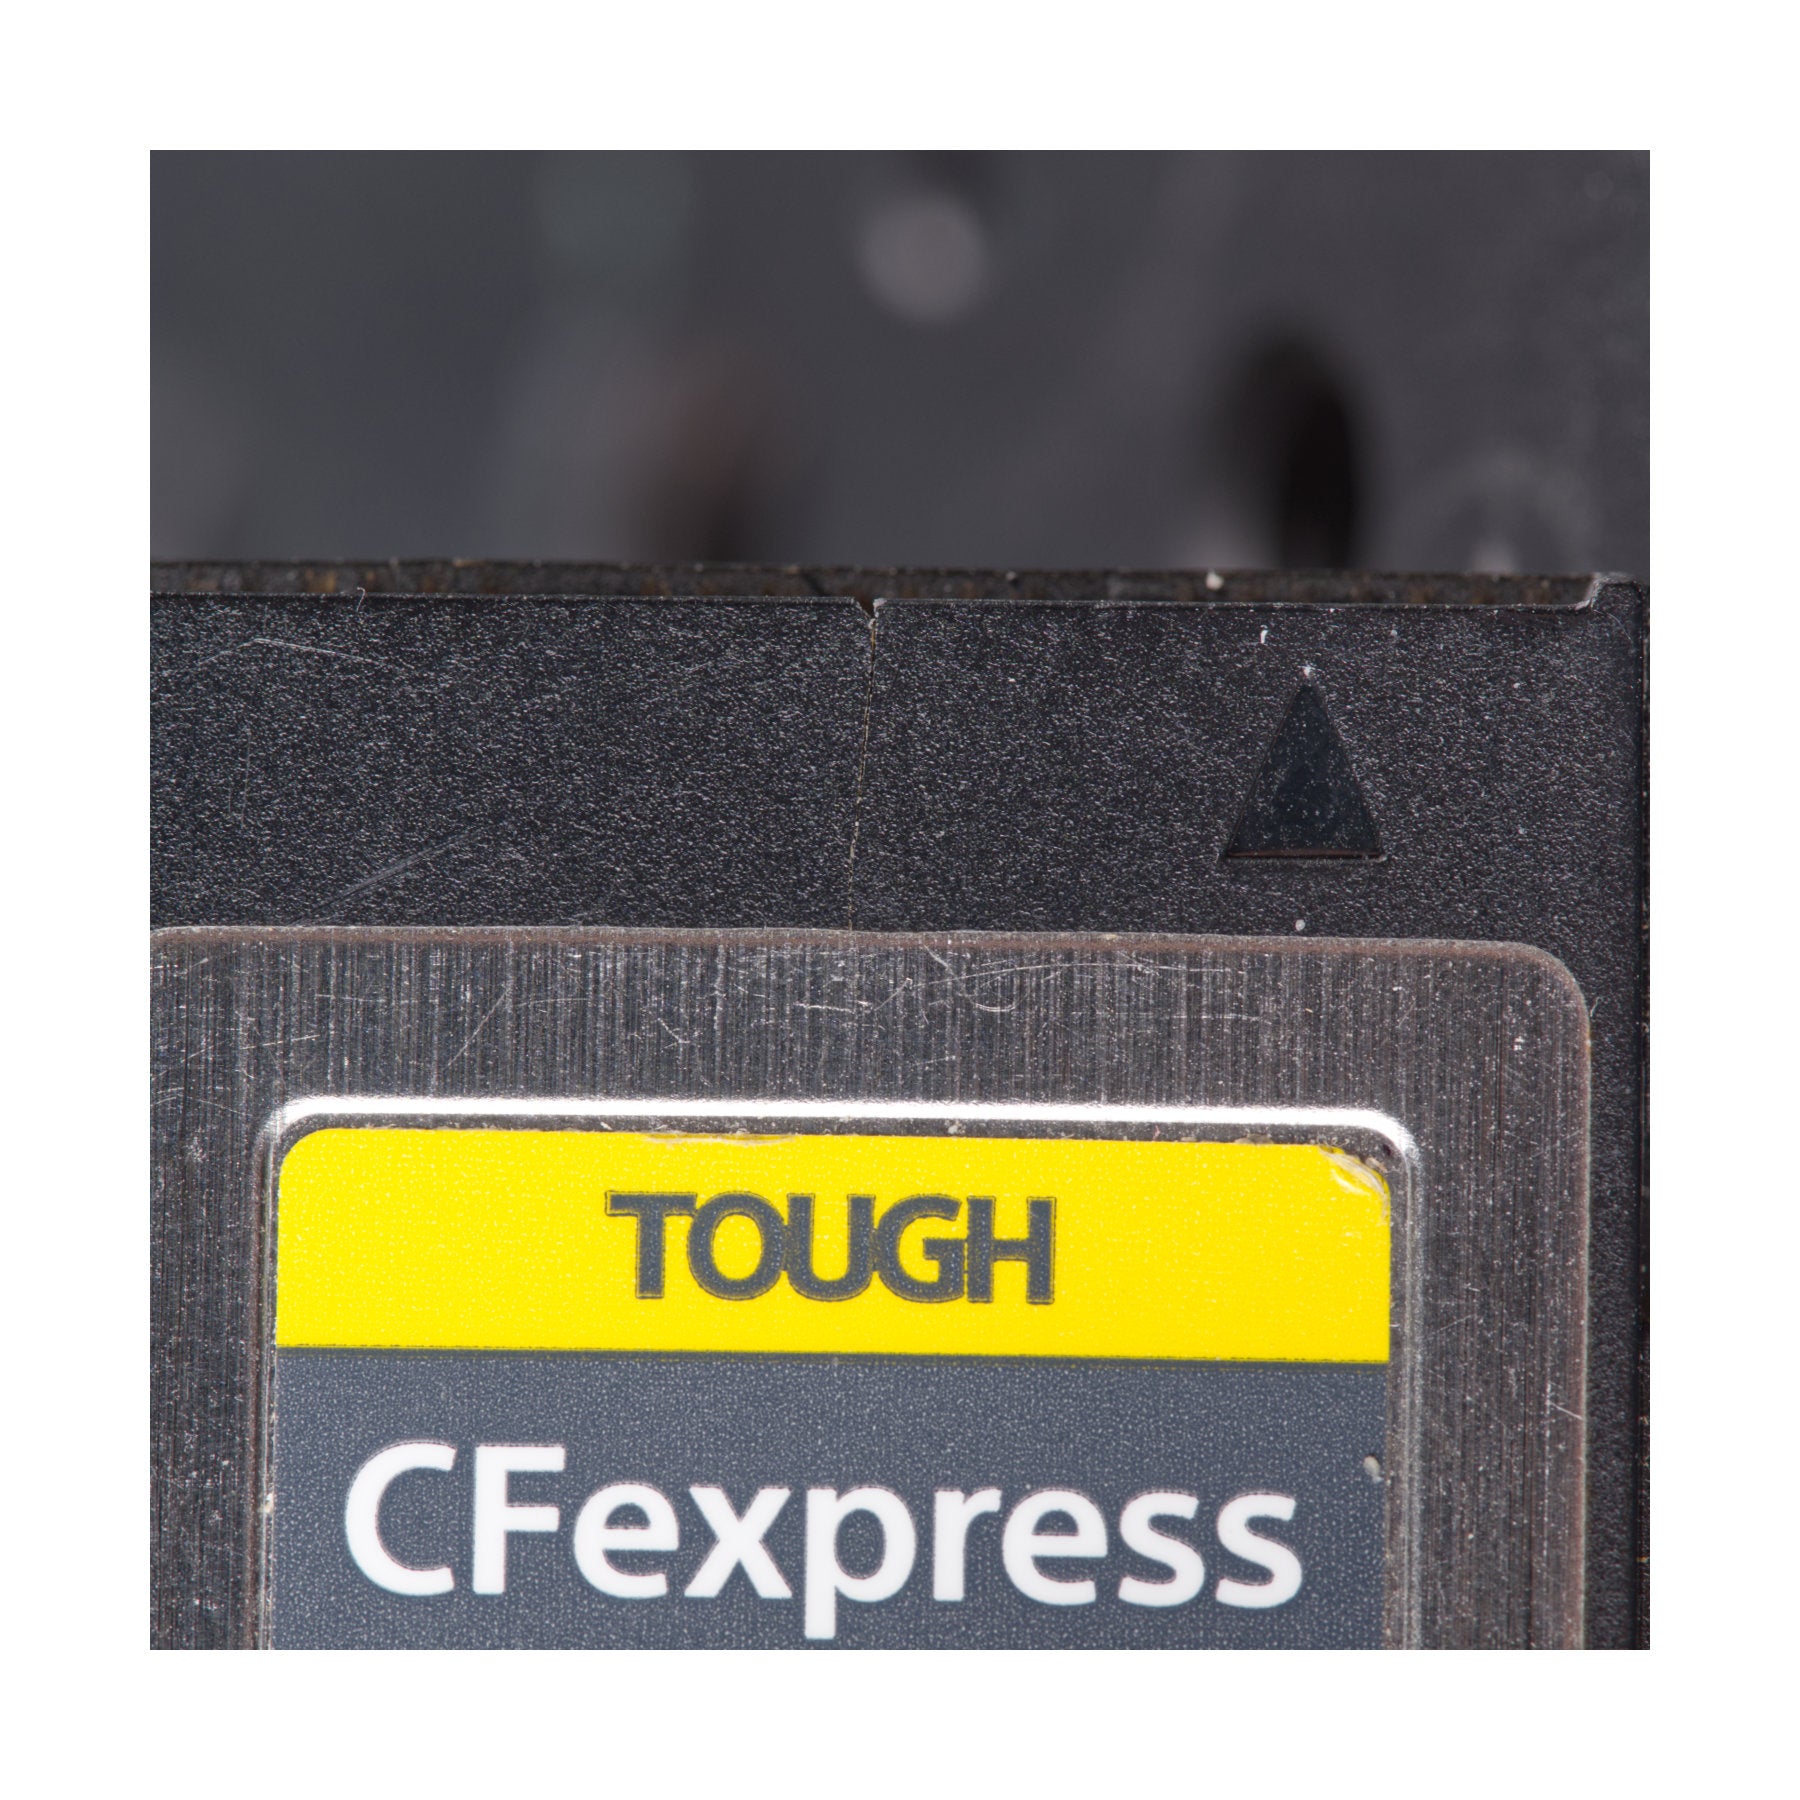 Buy Sony 256gb CFexpress Type B - Ex Rental at Topic Store